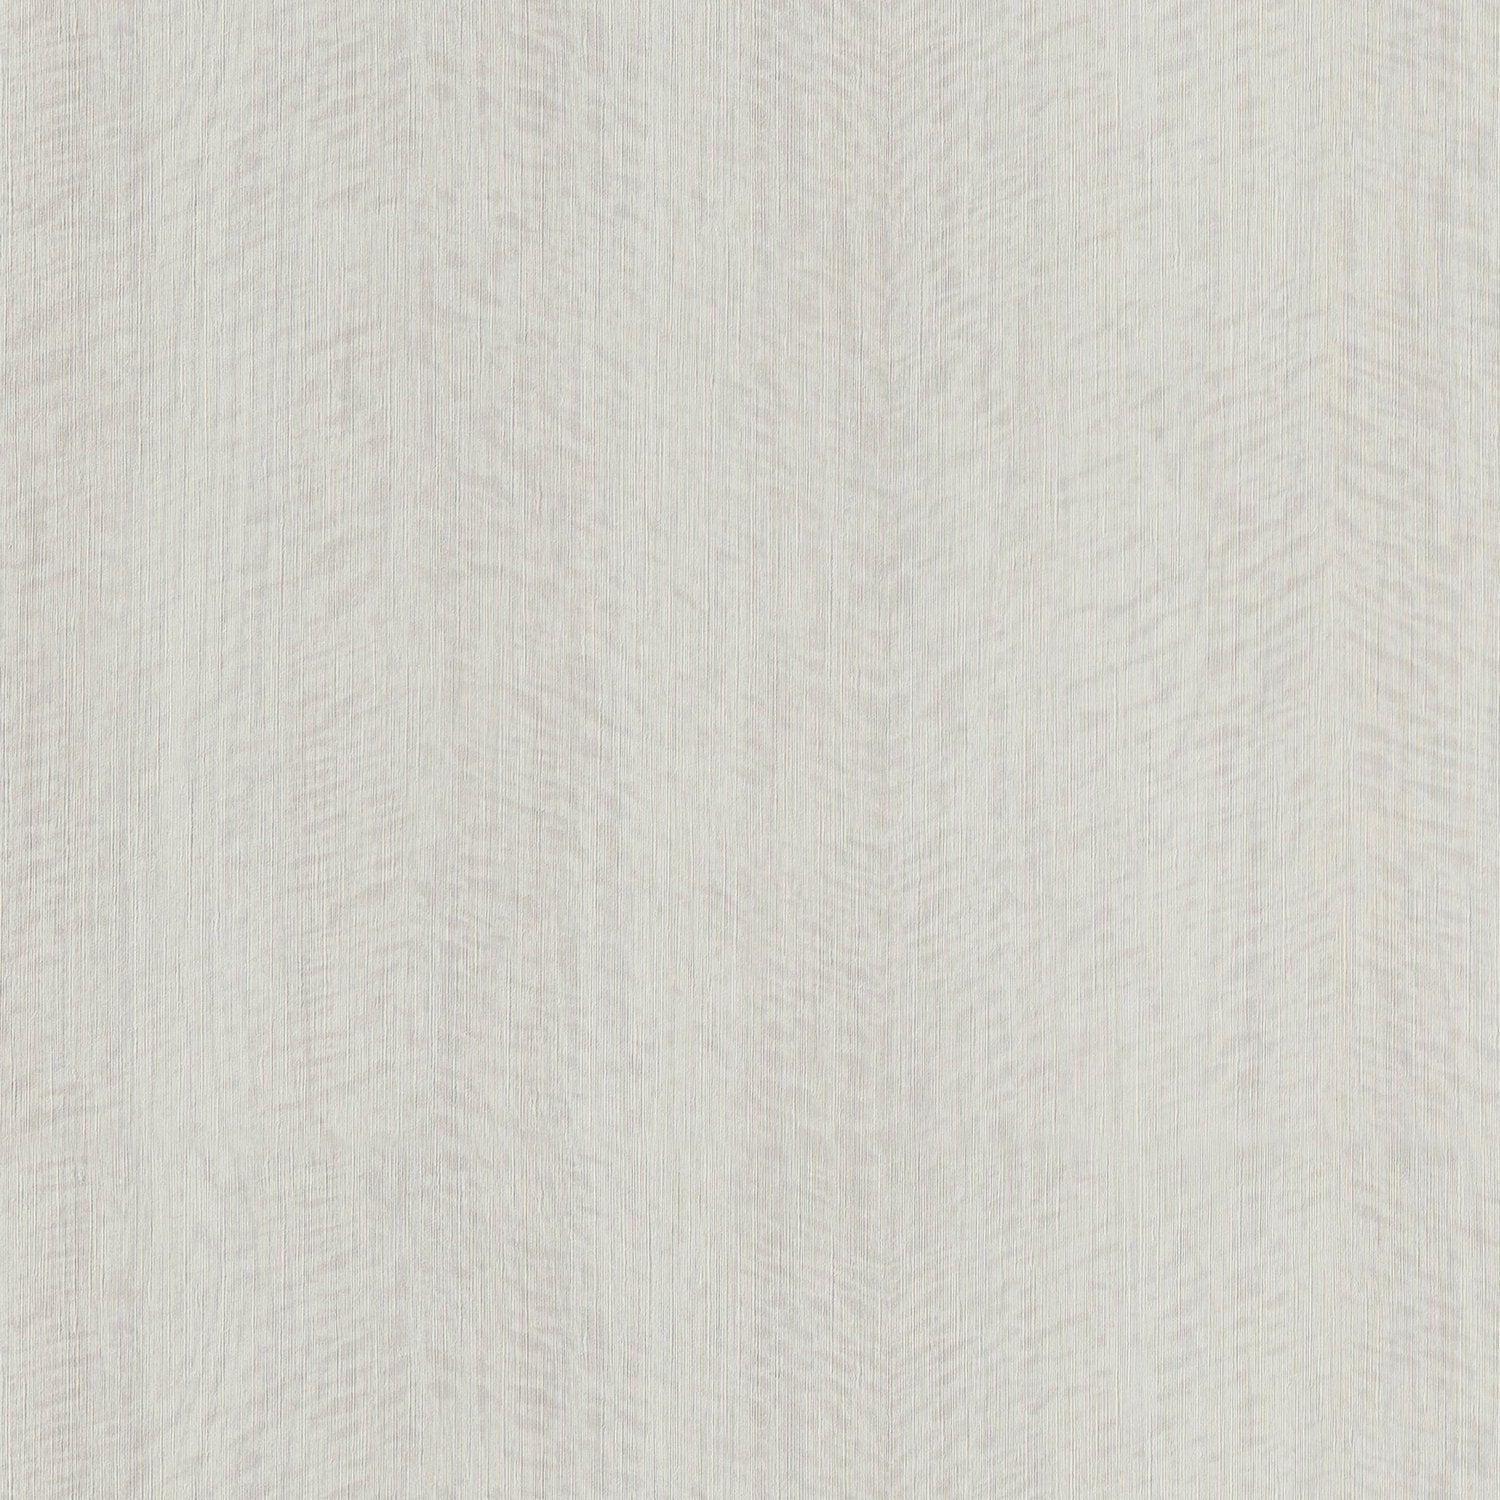 Woodn't It Be Nice - Y47870 - Wallcovering - Vycon - Kube Contract